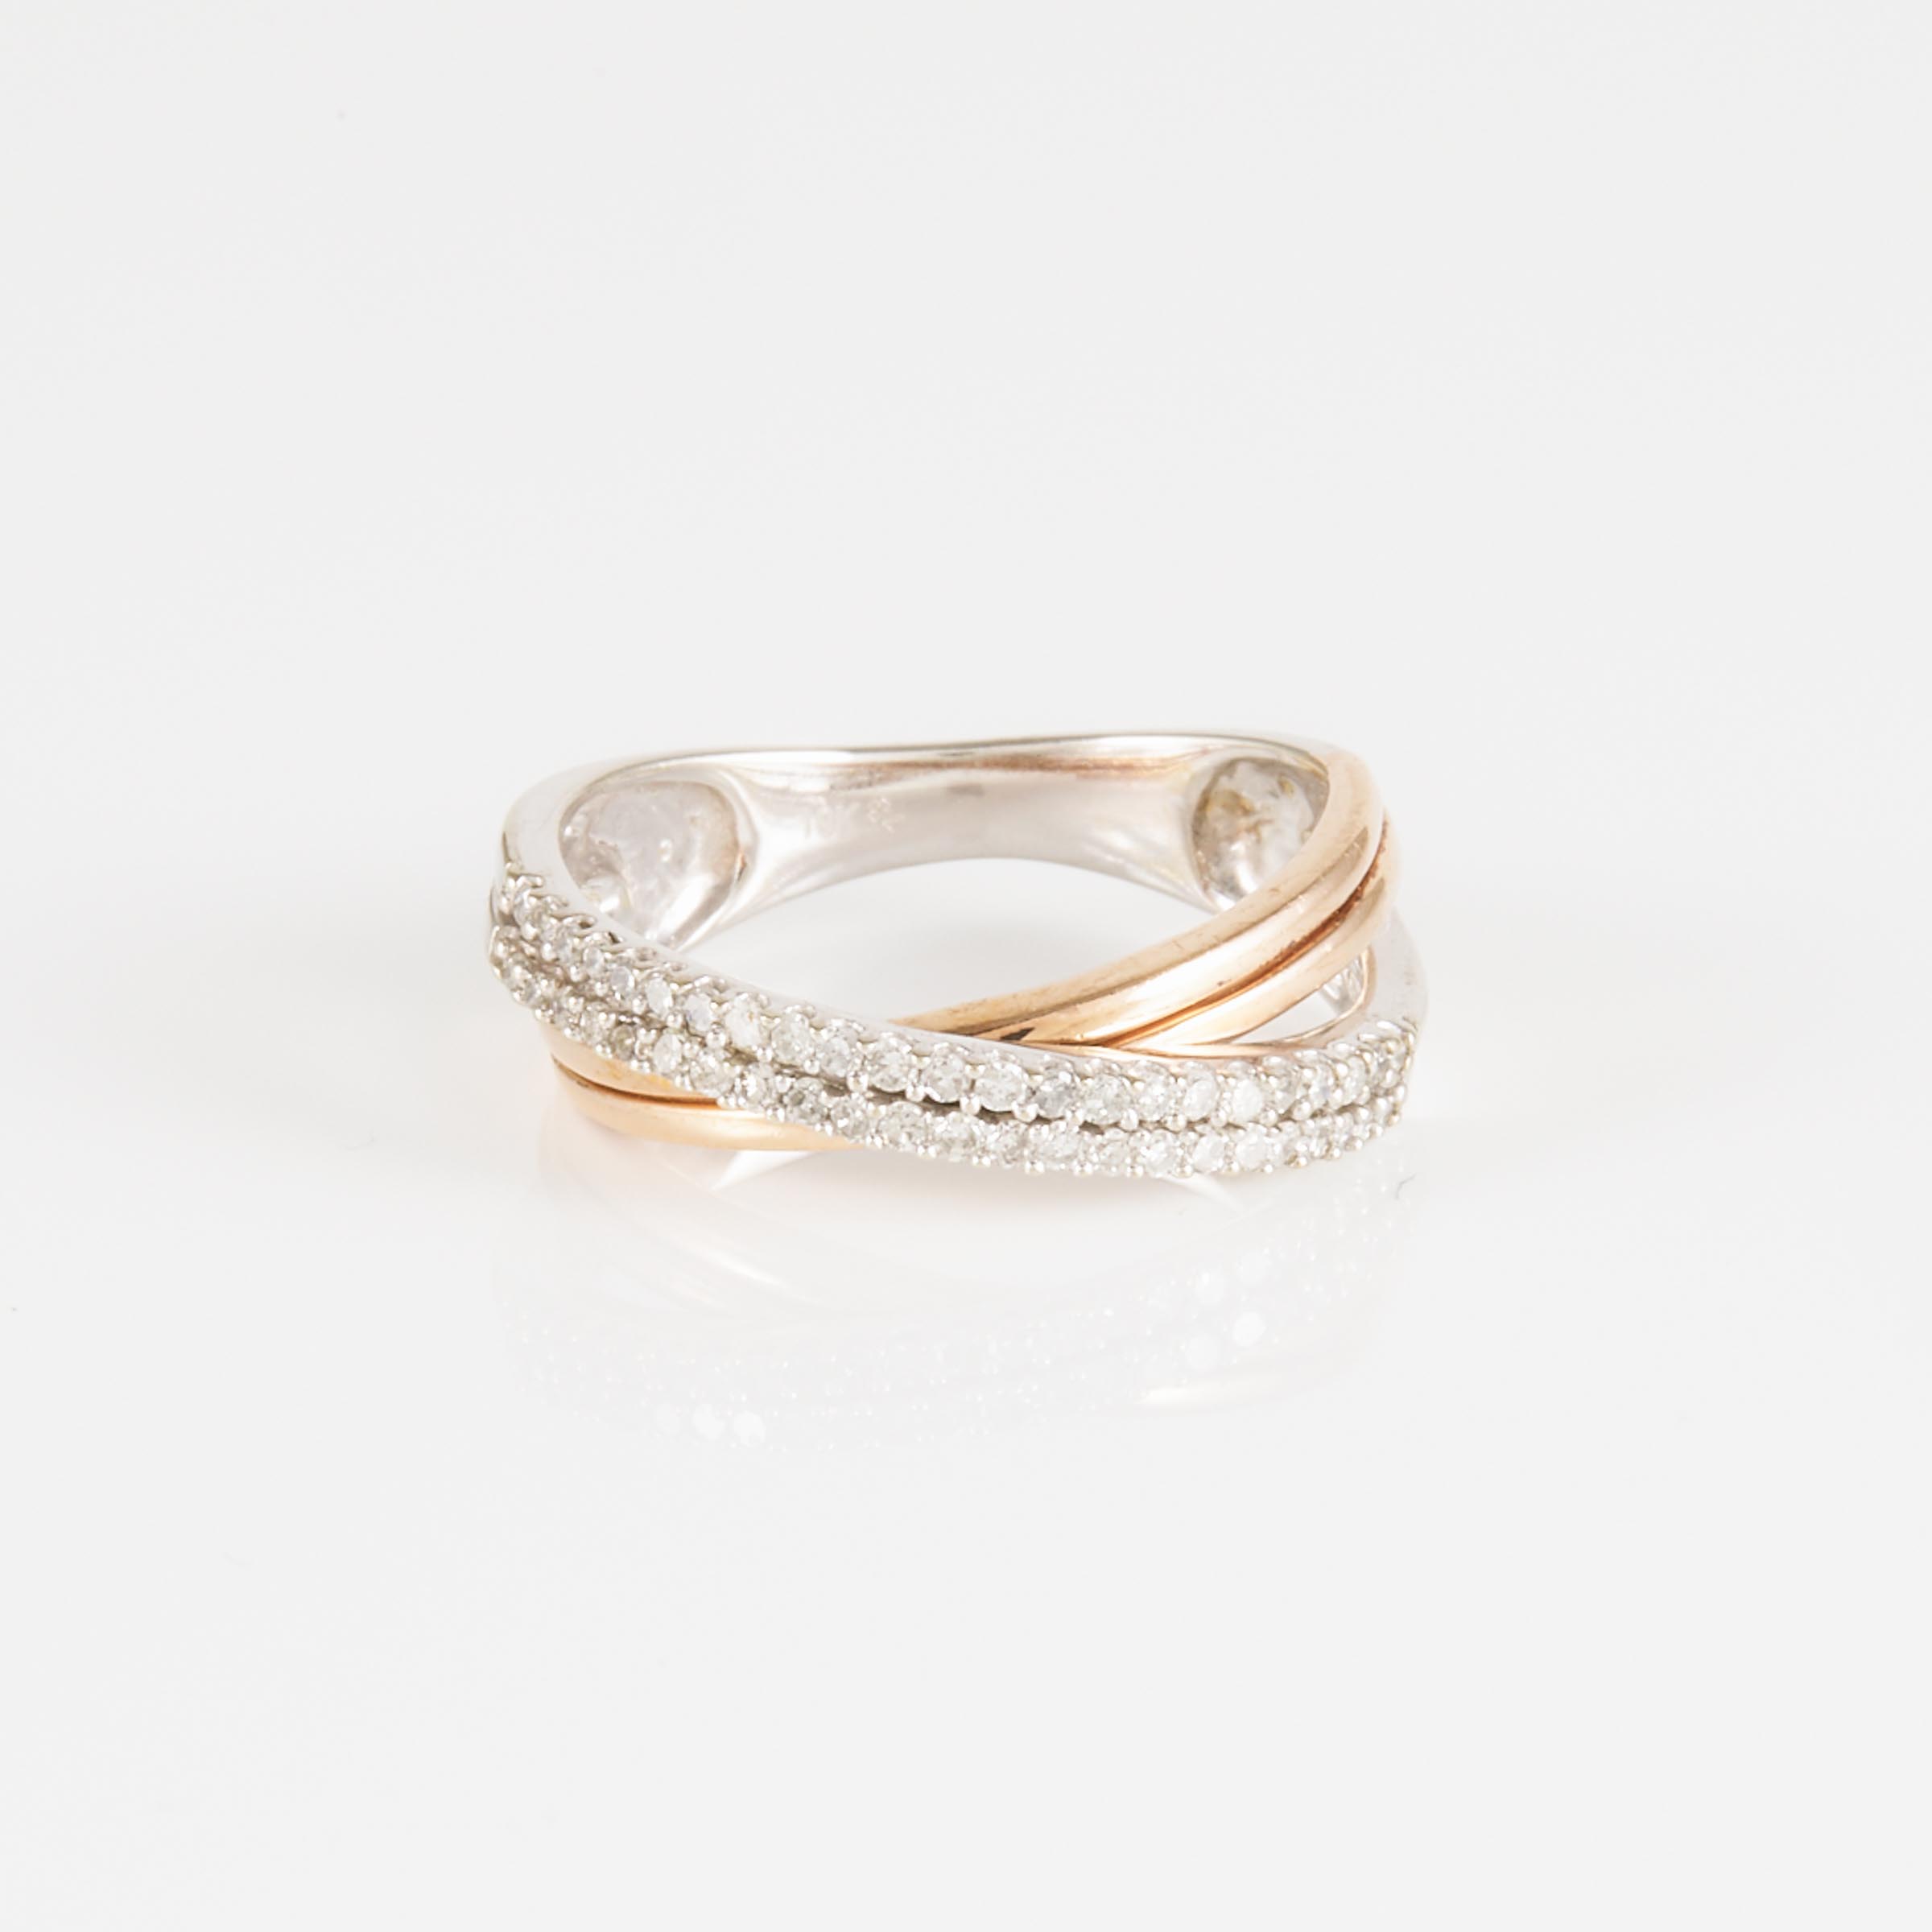 10k White And Rose Gold Ring